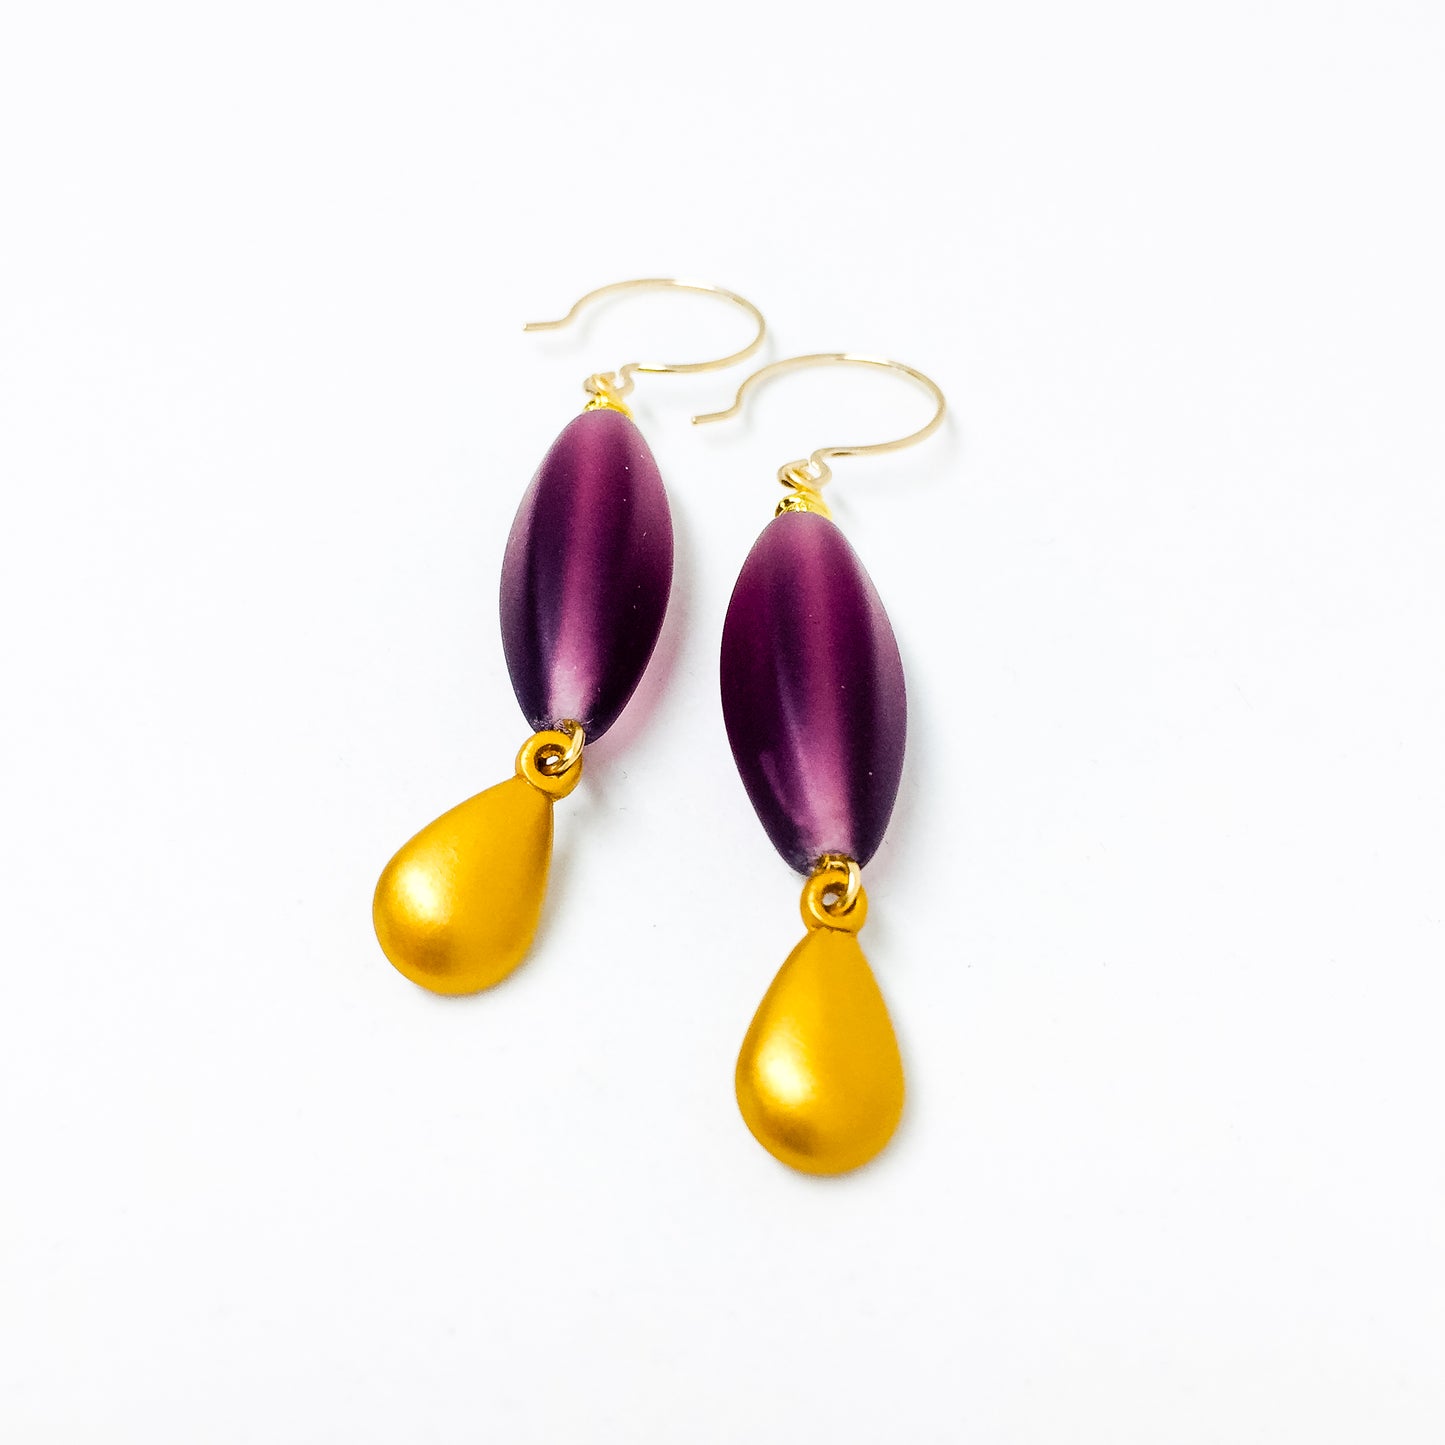 Plum frosted Czech glass bead drop earrings with gold charm